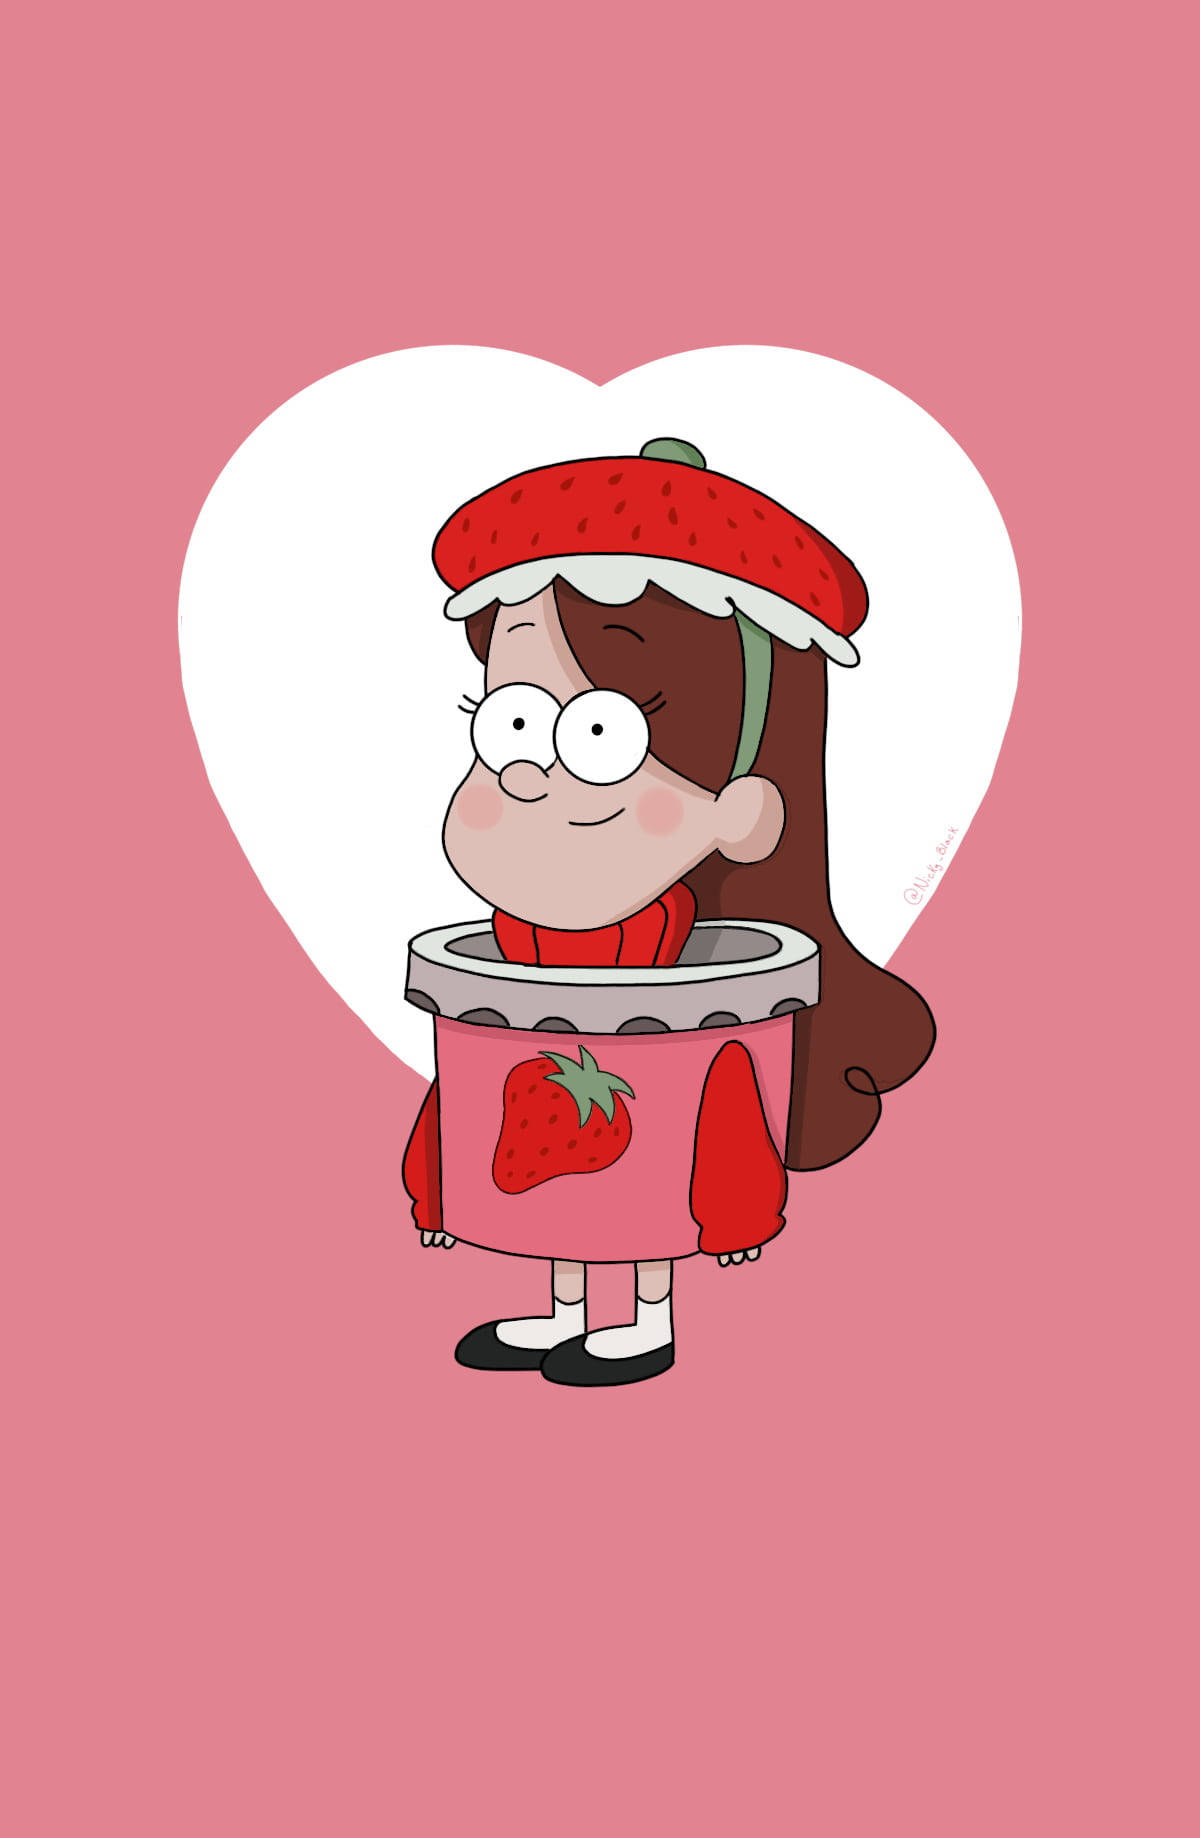 Strawberry Heart Mabel Pines Wallpaper